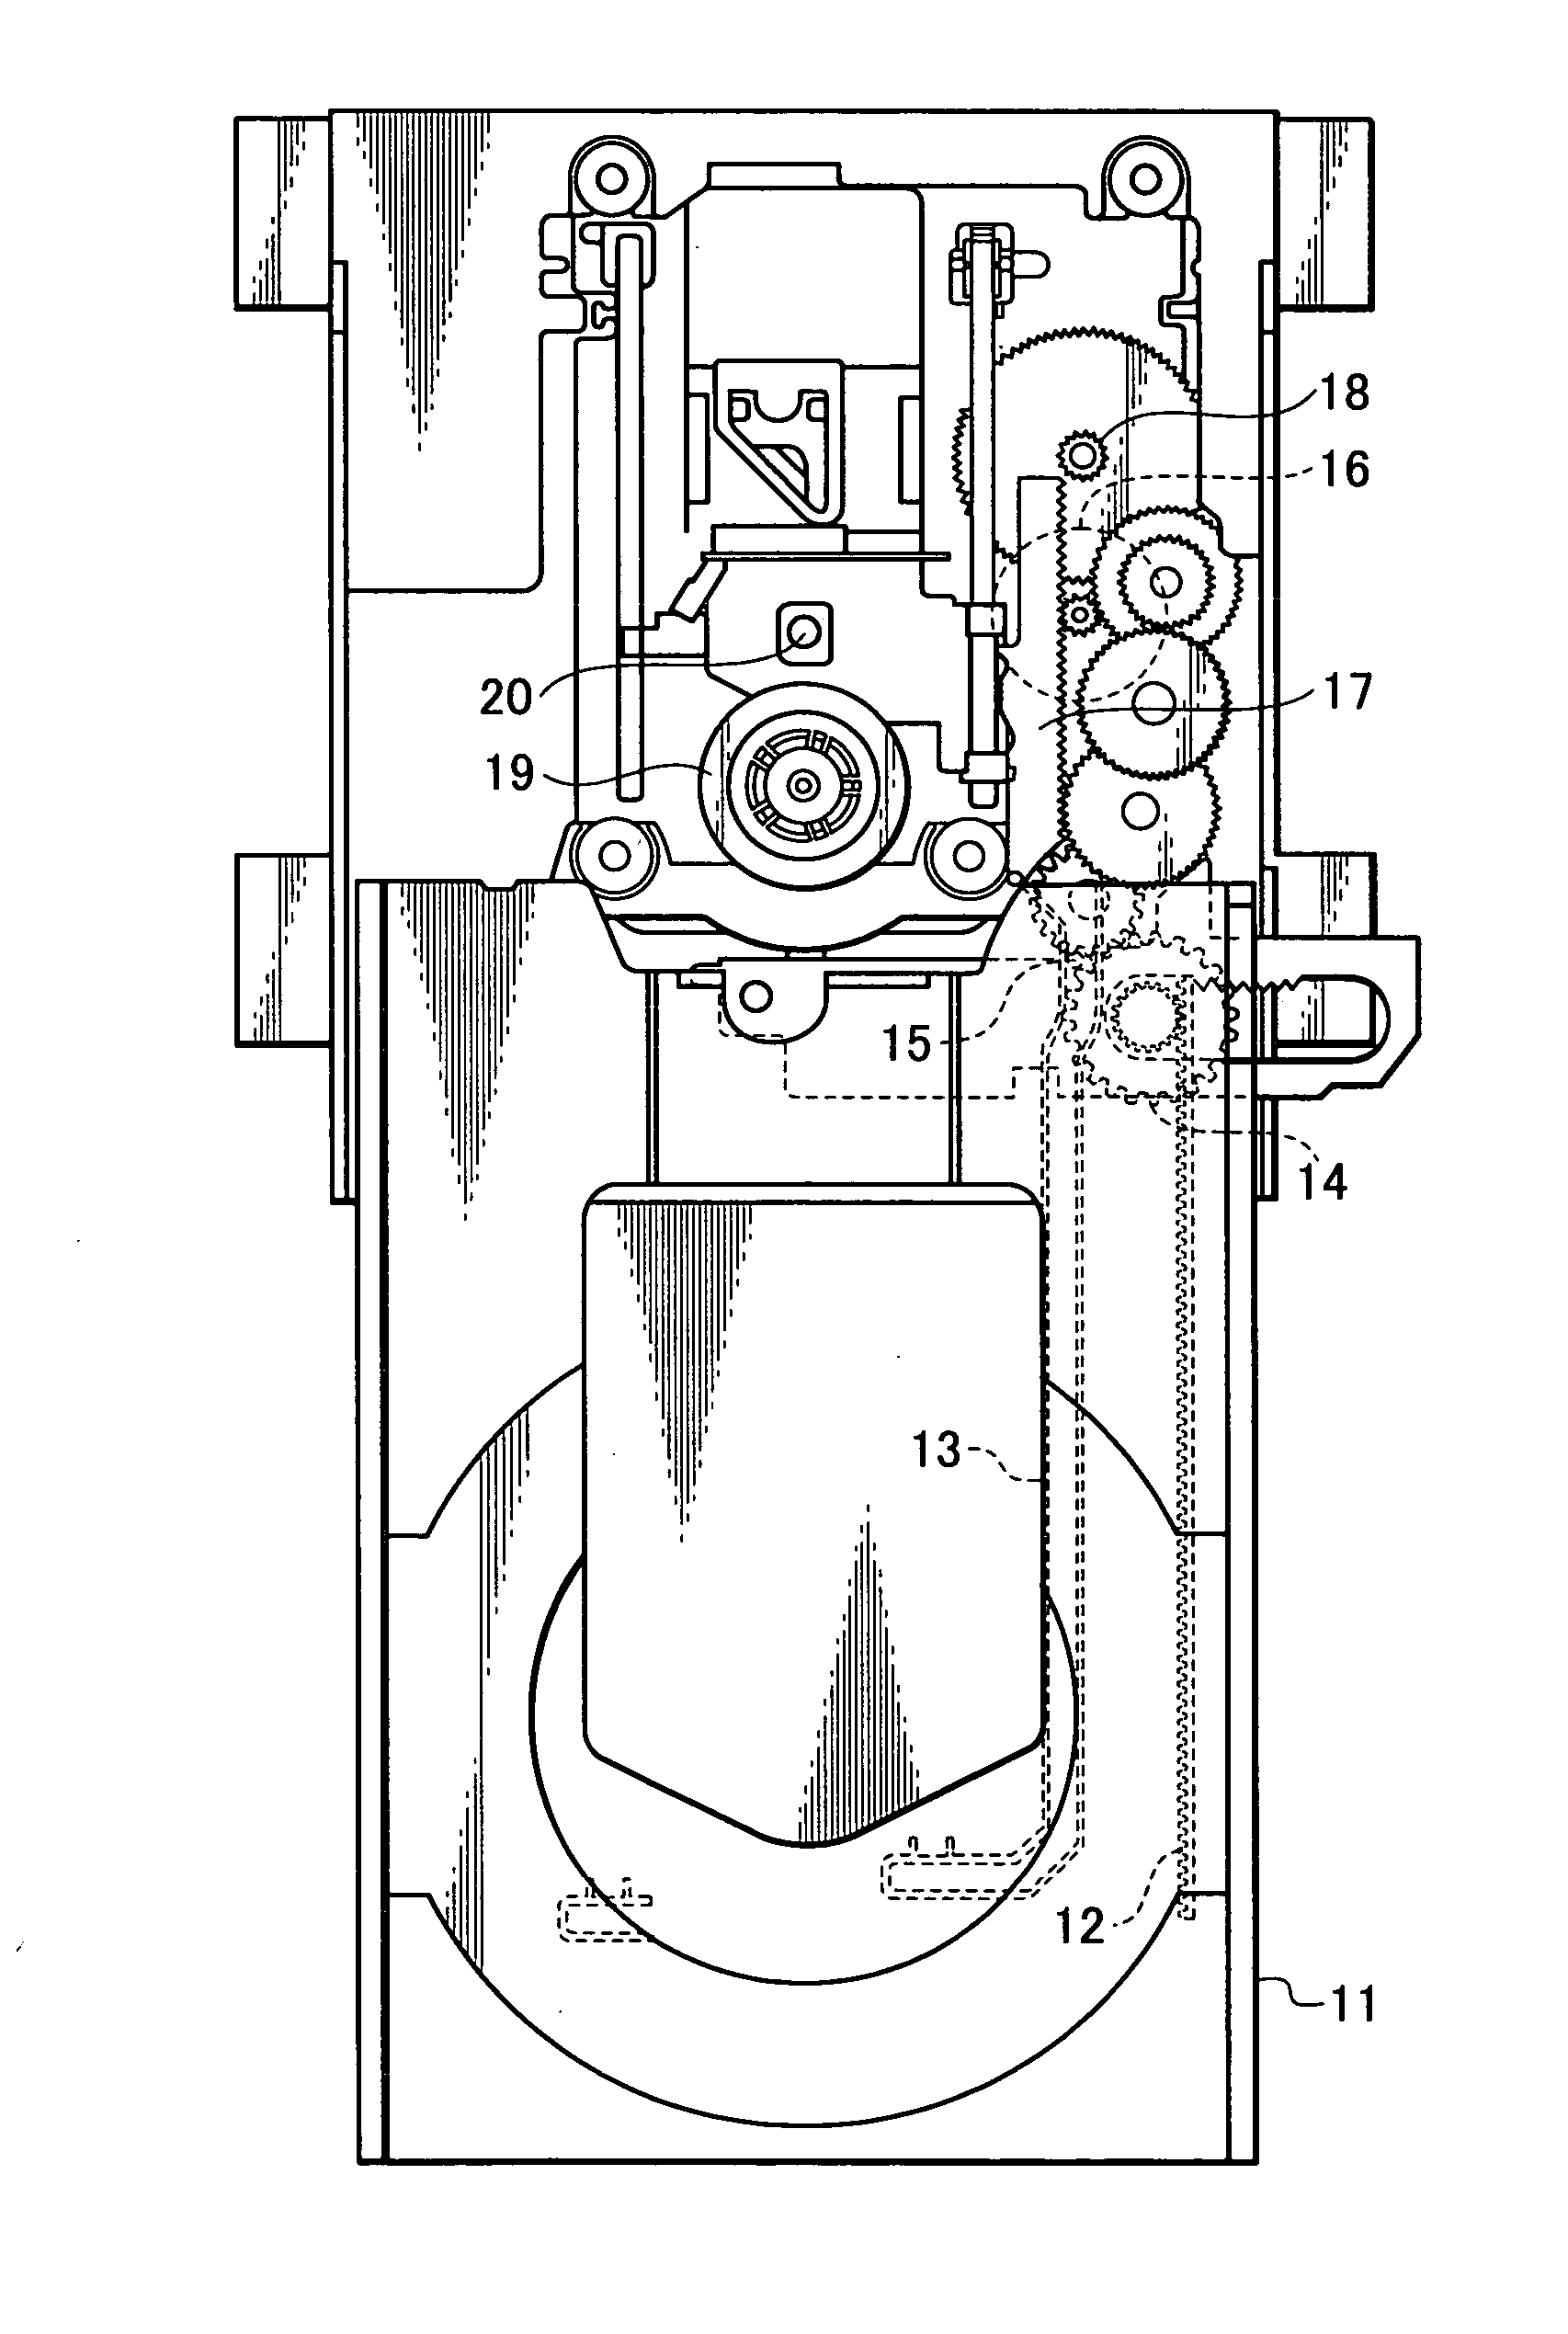 Electronic device provided with rack and pinion